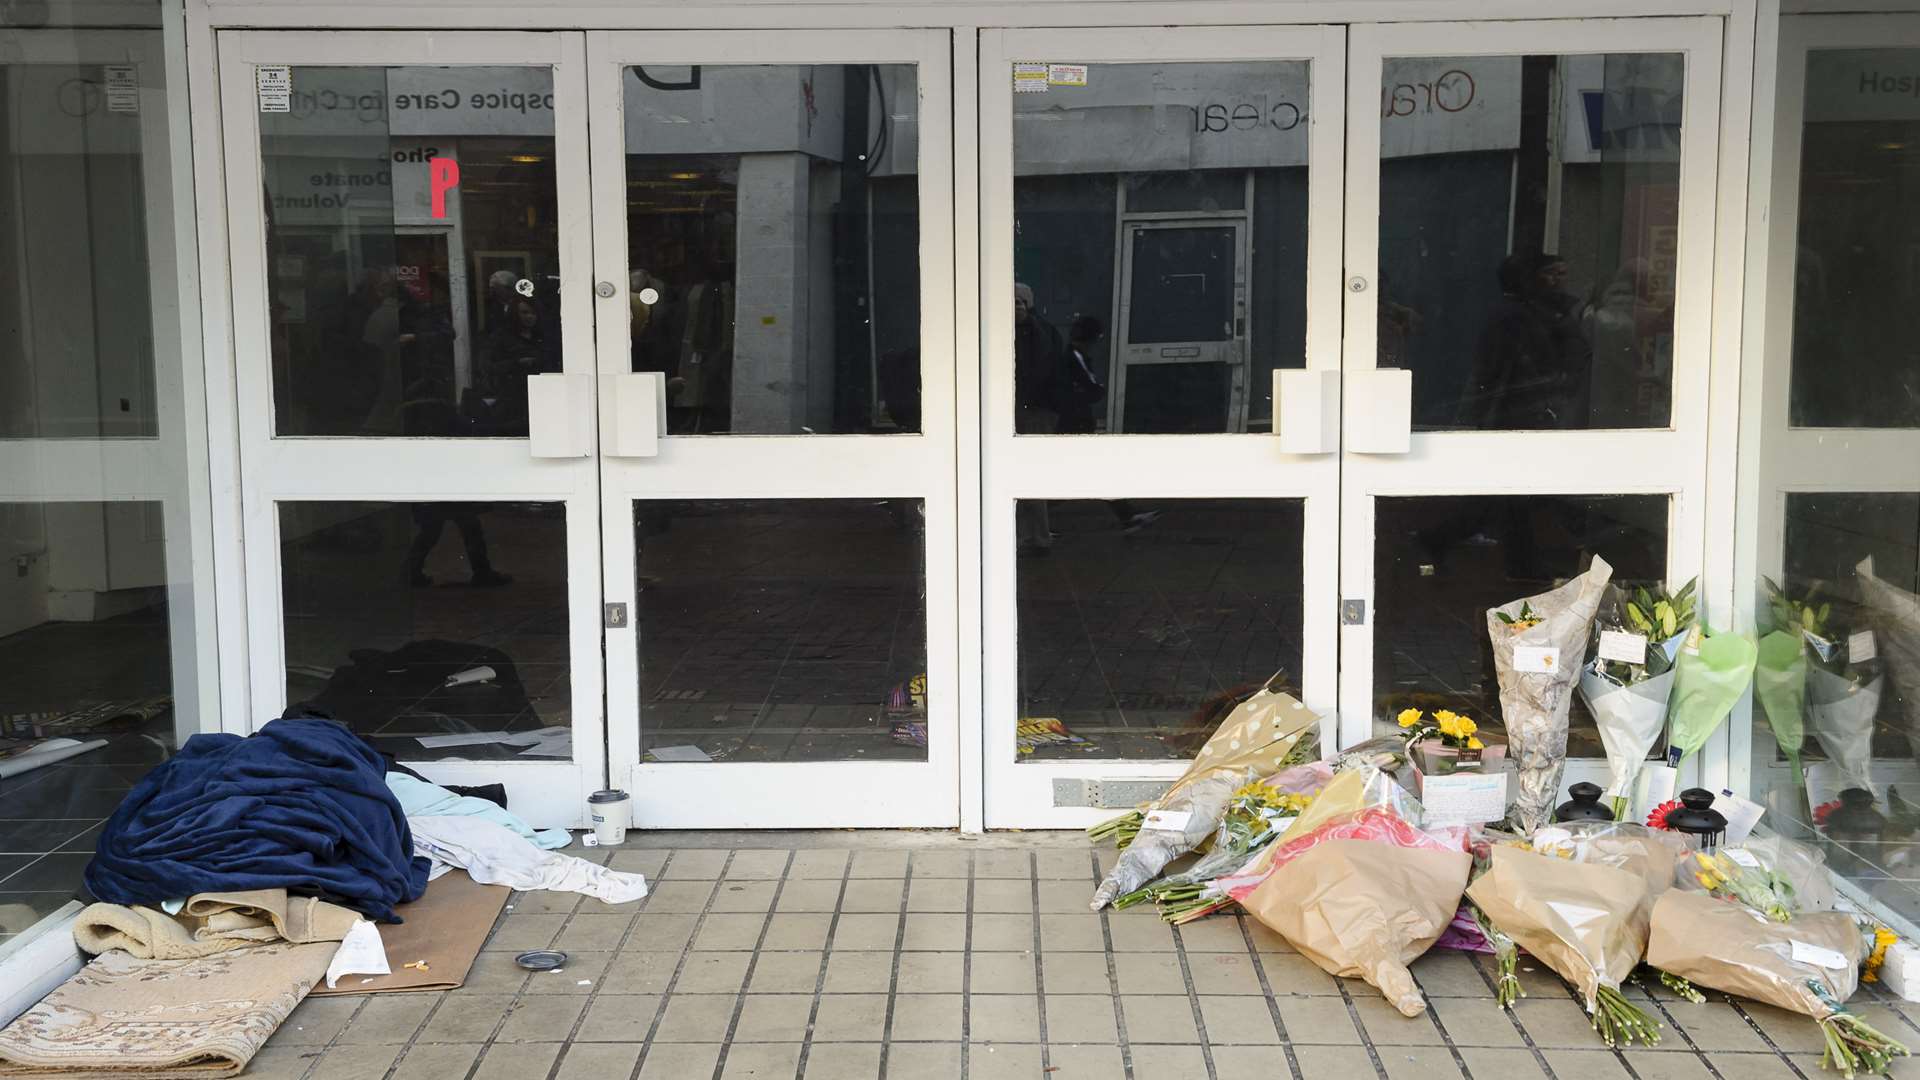 Views of an empty retail property in High Street, Chatham, where a homeless man was found dead on Christmas Eve